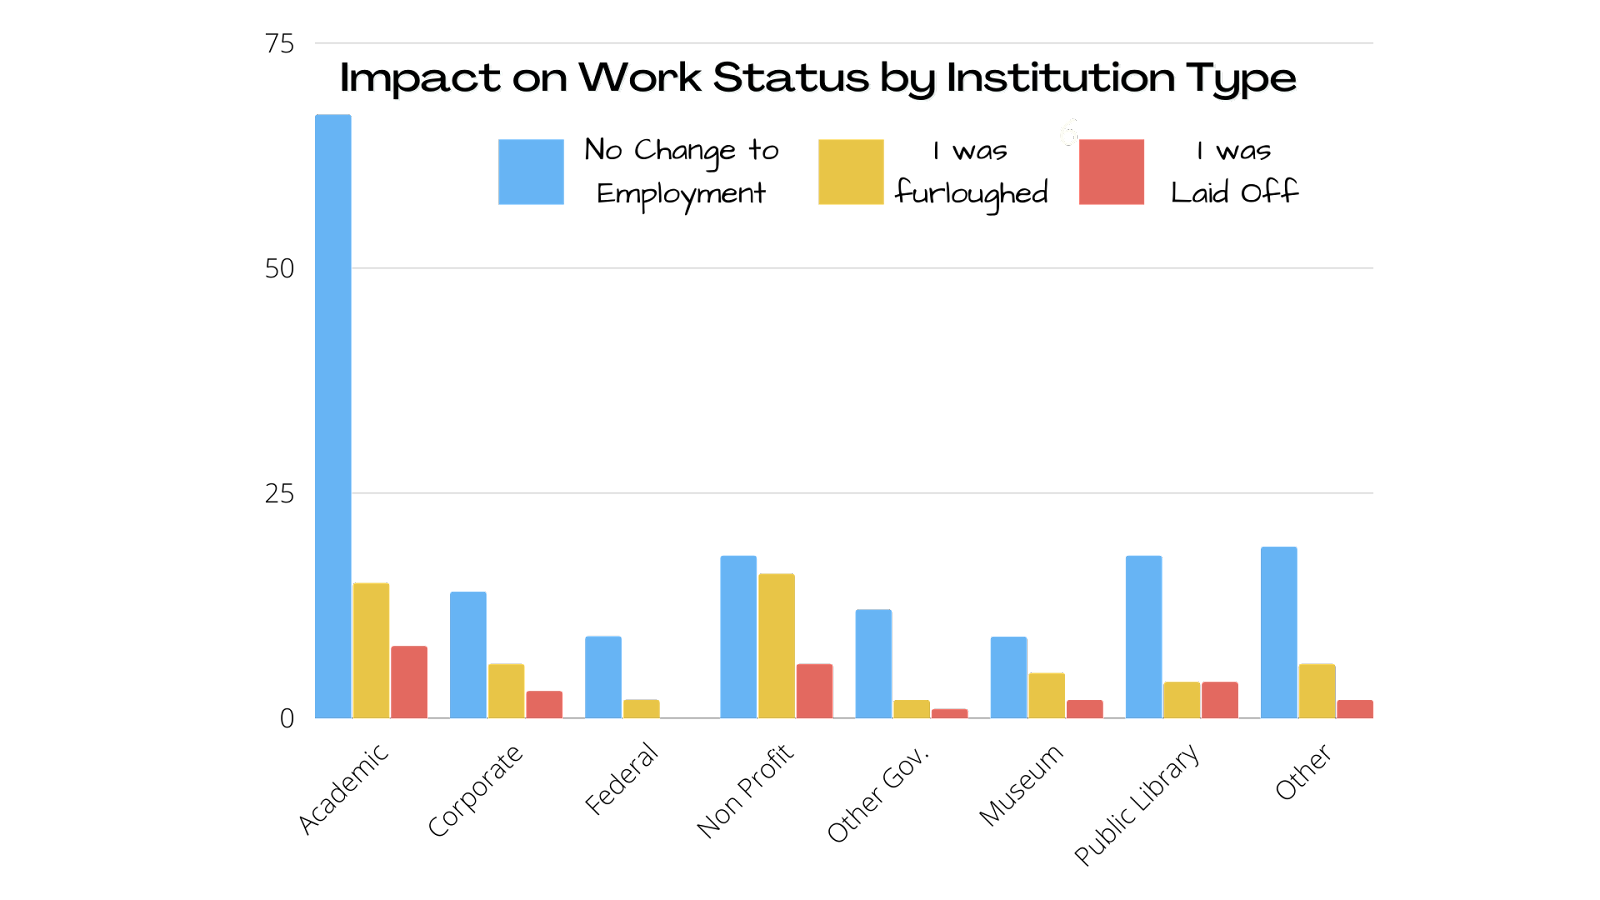 The visualization shows that the majority of respondents are associated with academic repositories. Across all categories, more than half of respondents indicate "No change" in their job status, which indicates that, while the pandemic was devastating to some, at least half of the survey respondents reported that their job status was not personally impacted.